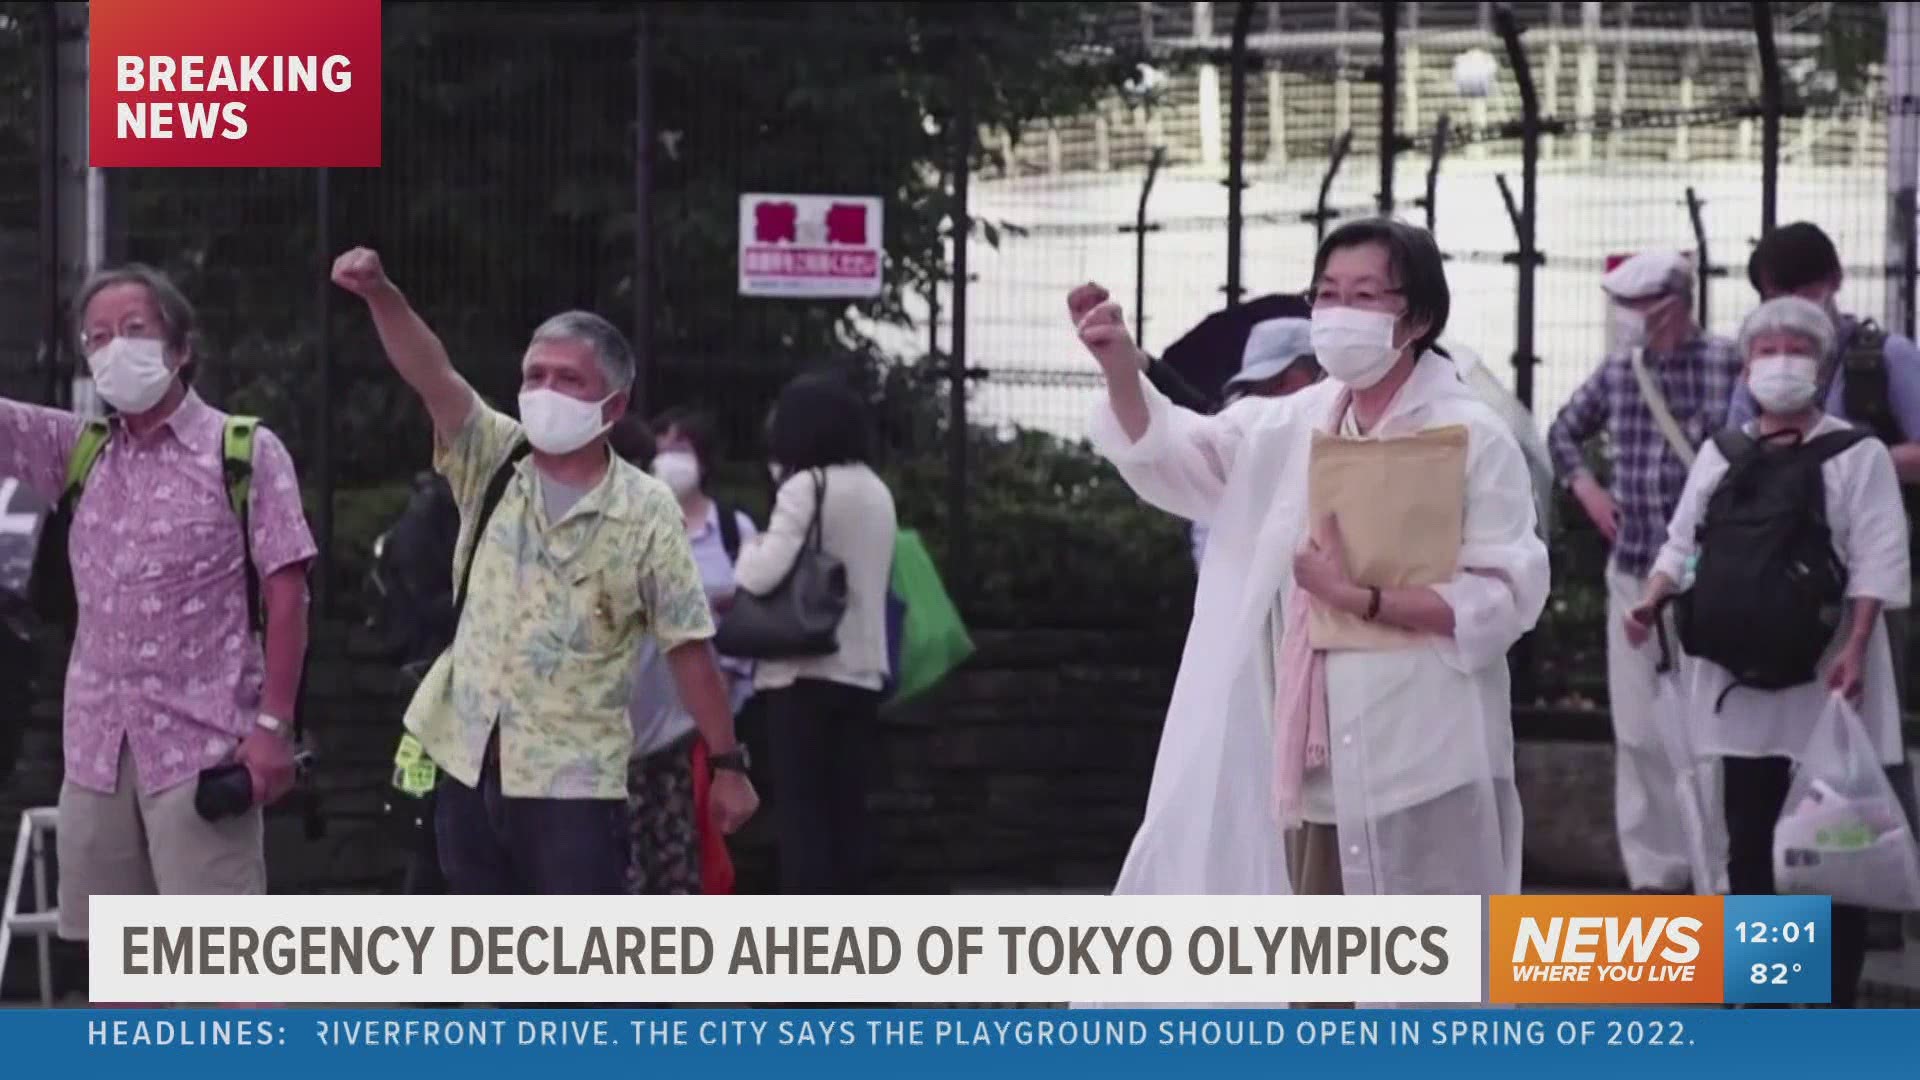 With a state of emergency declared in Japan over rising COVID-19 cases, the Tokyo Olympics will now more than ever be a made-for-TV event.